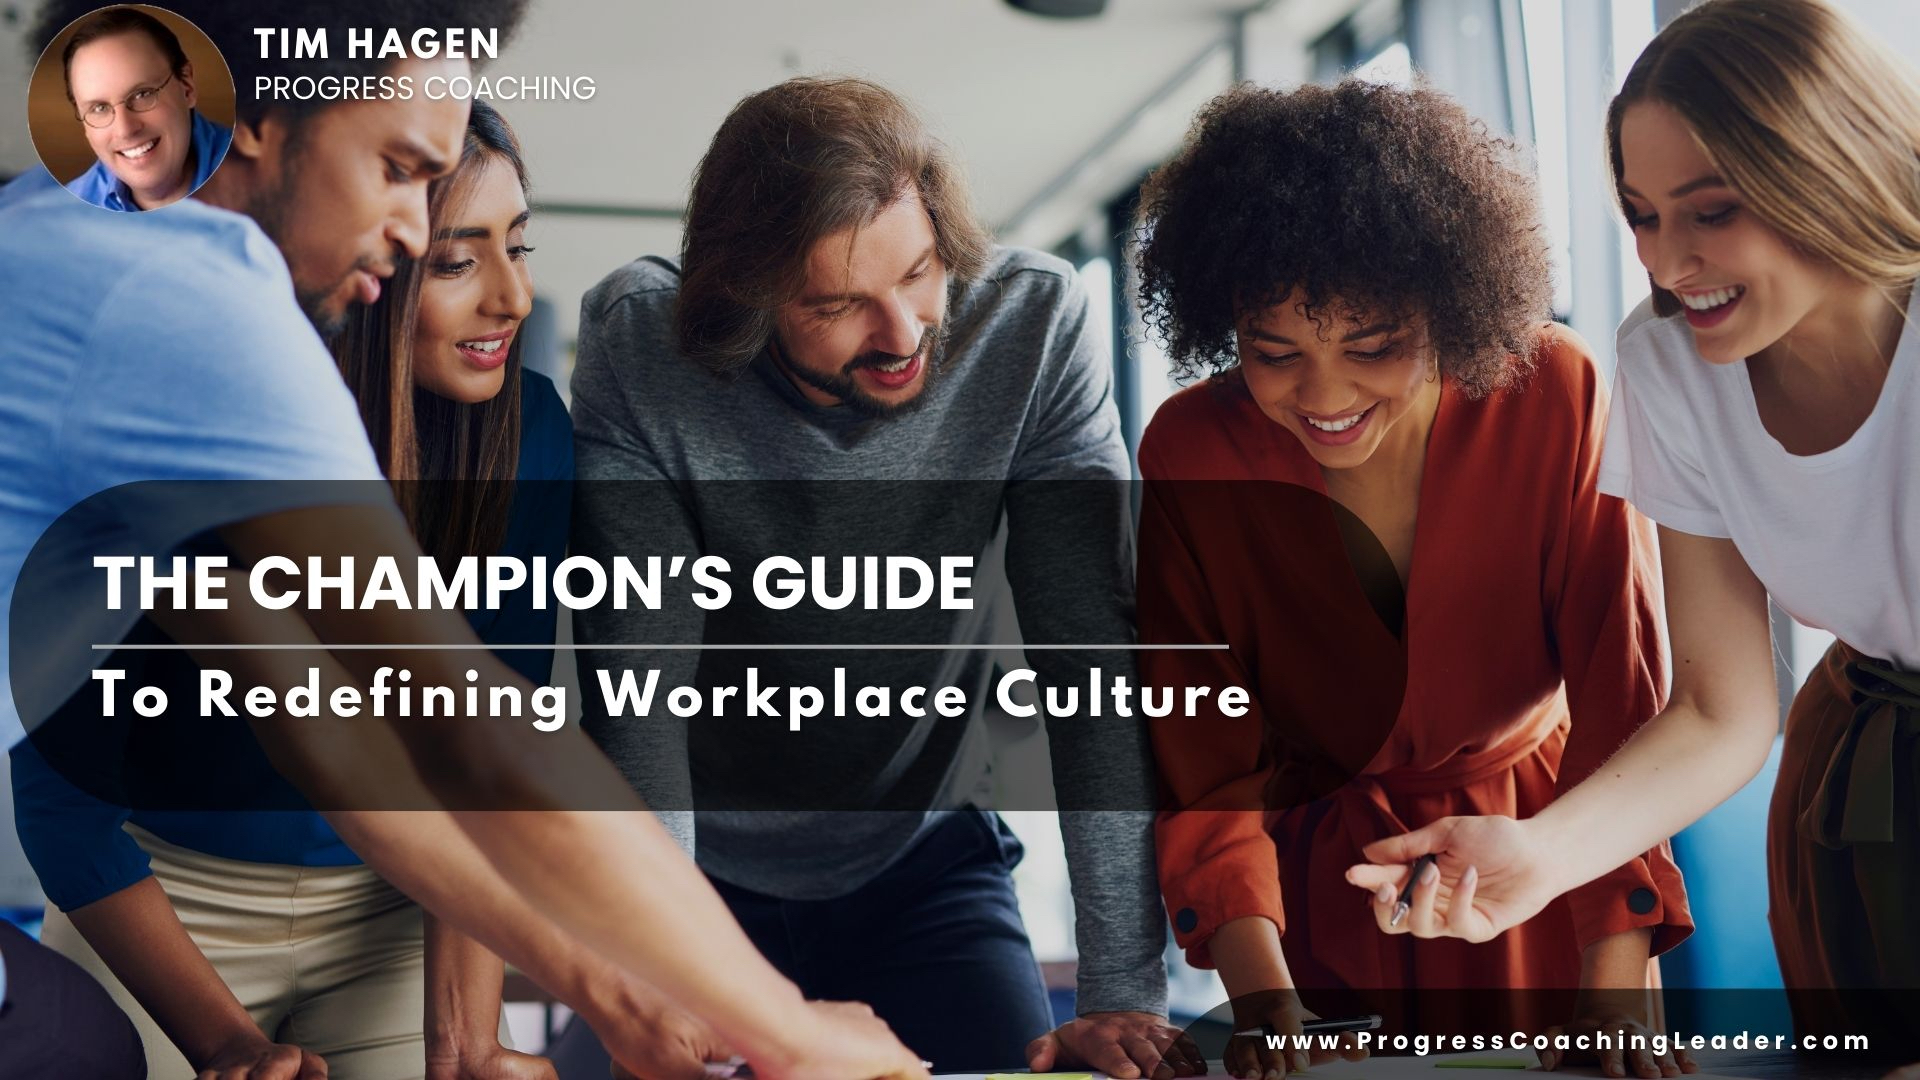 The Champion's Guide to Redefining Workplace Culture